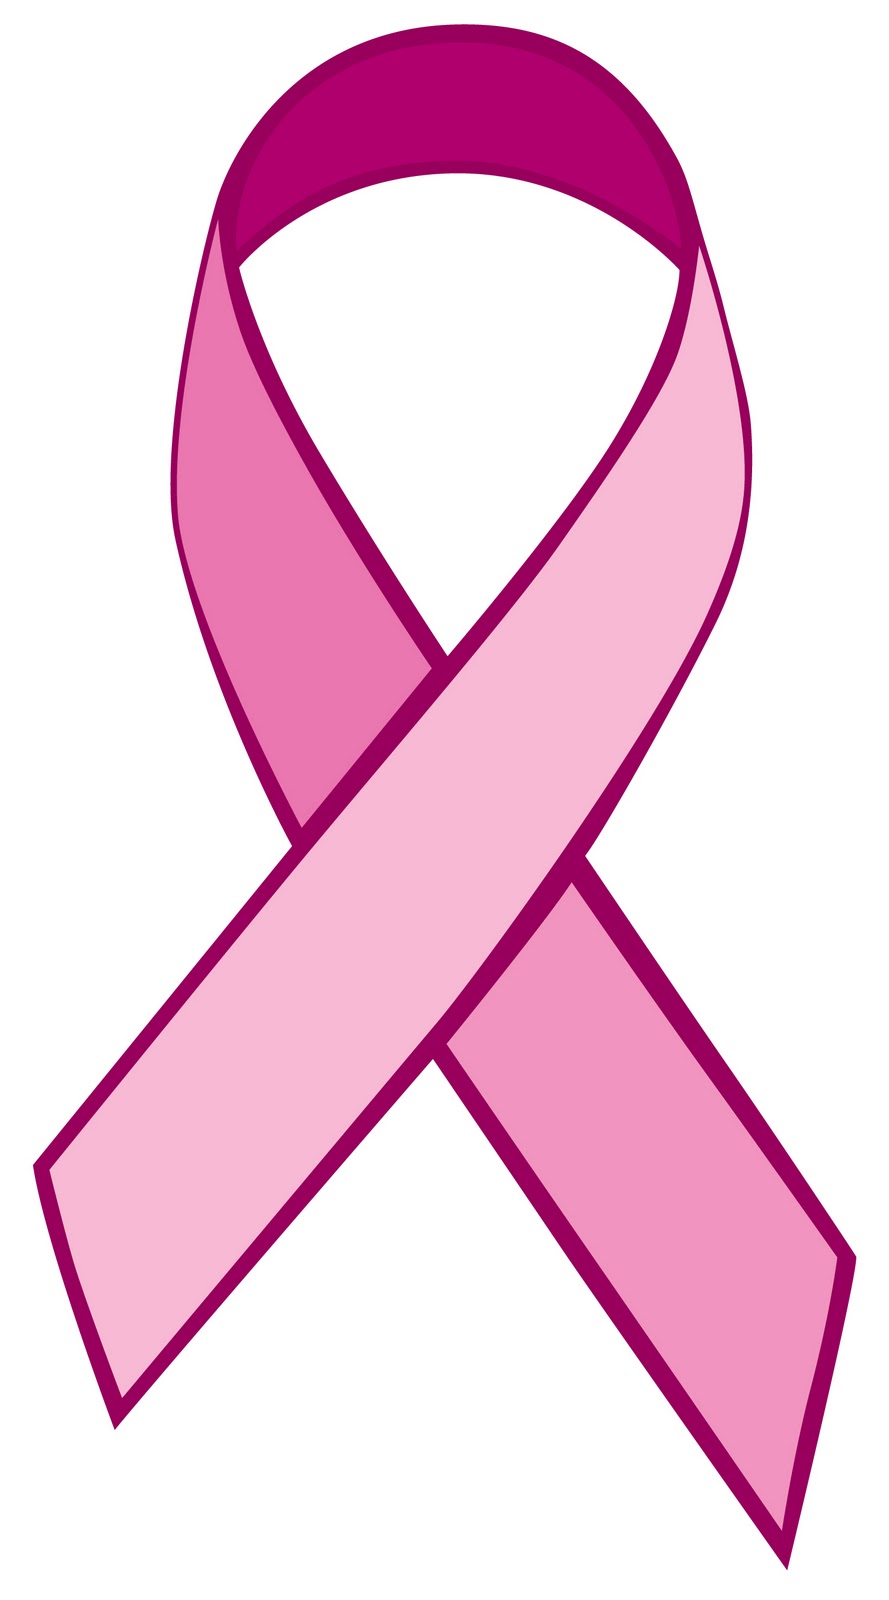 Free cancer ribbons, Download Free cancer ribbons png images, Free